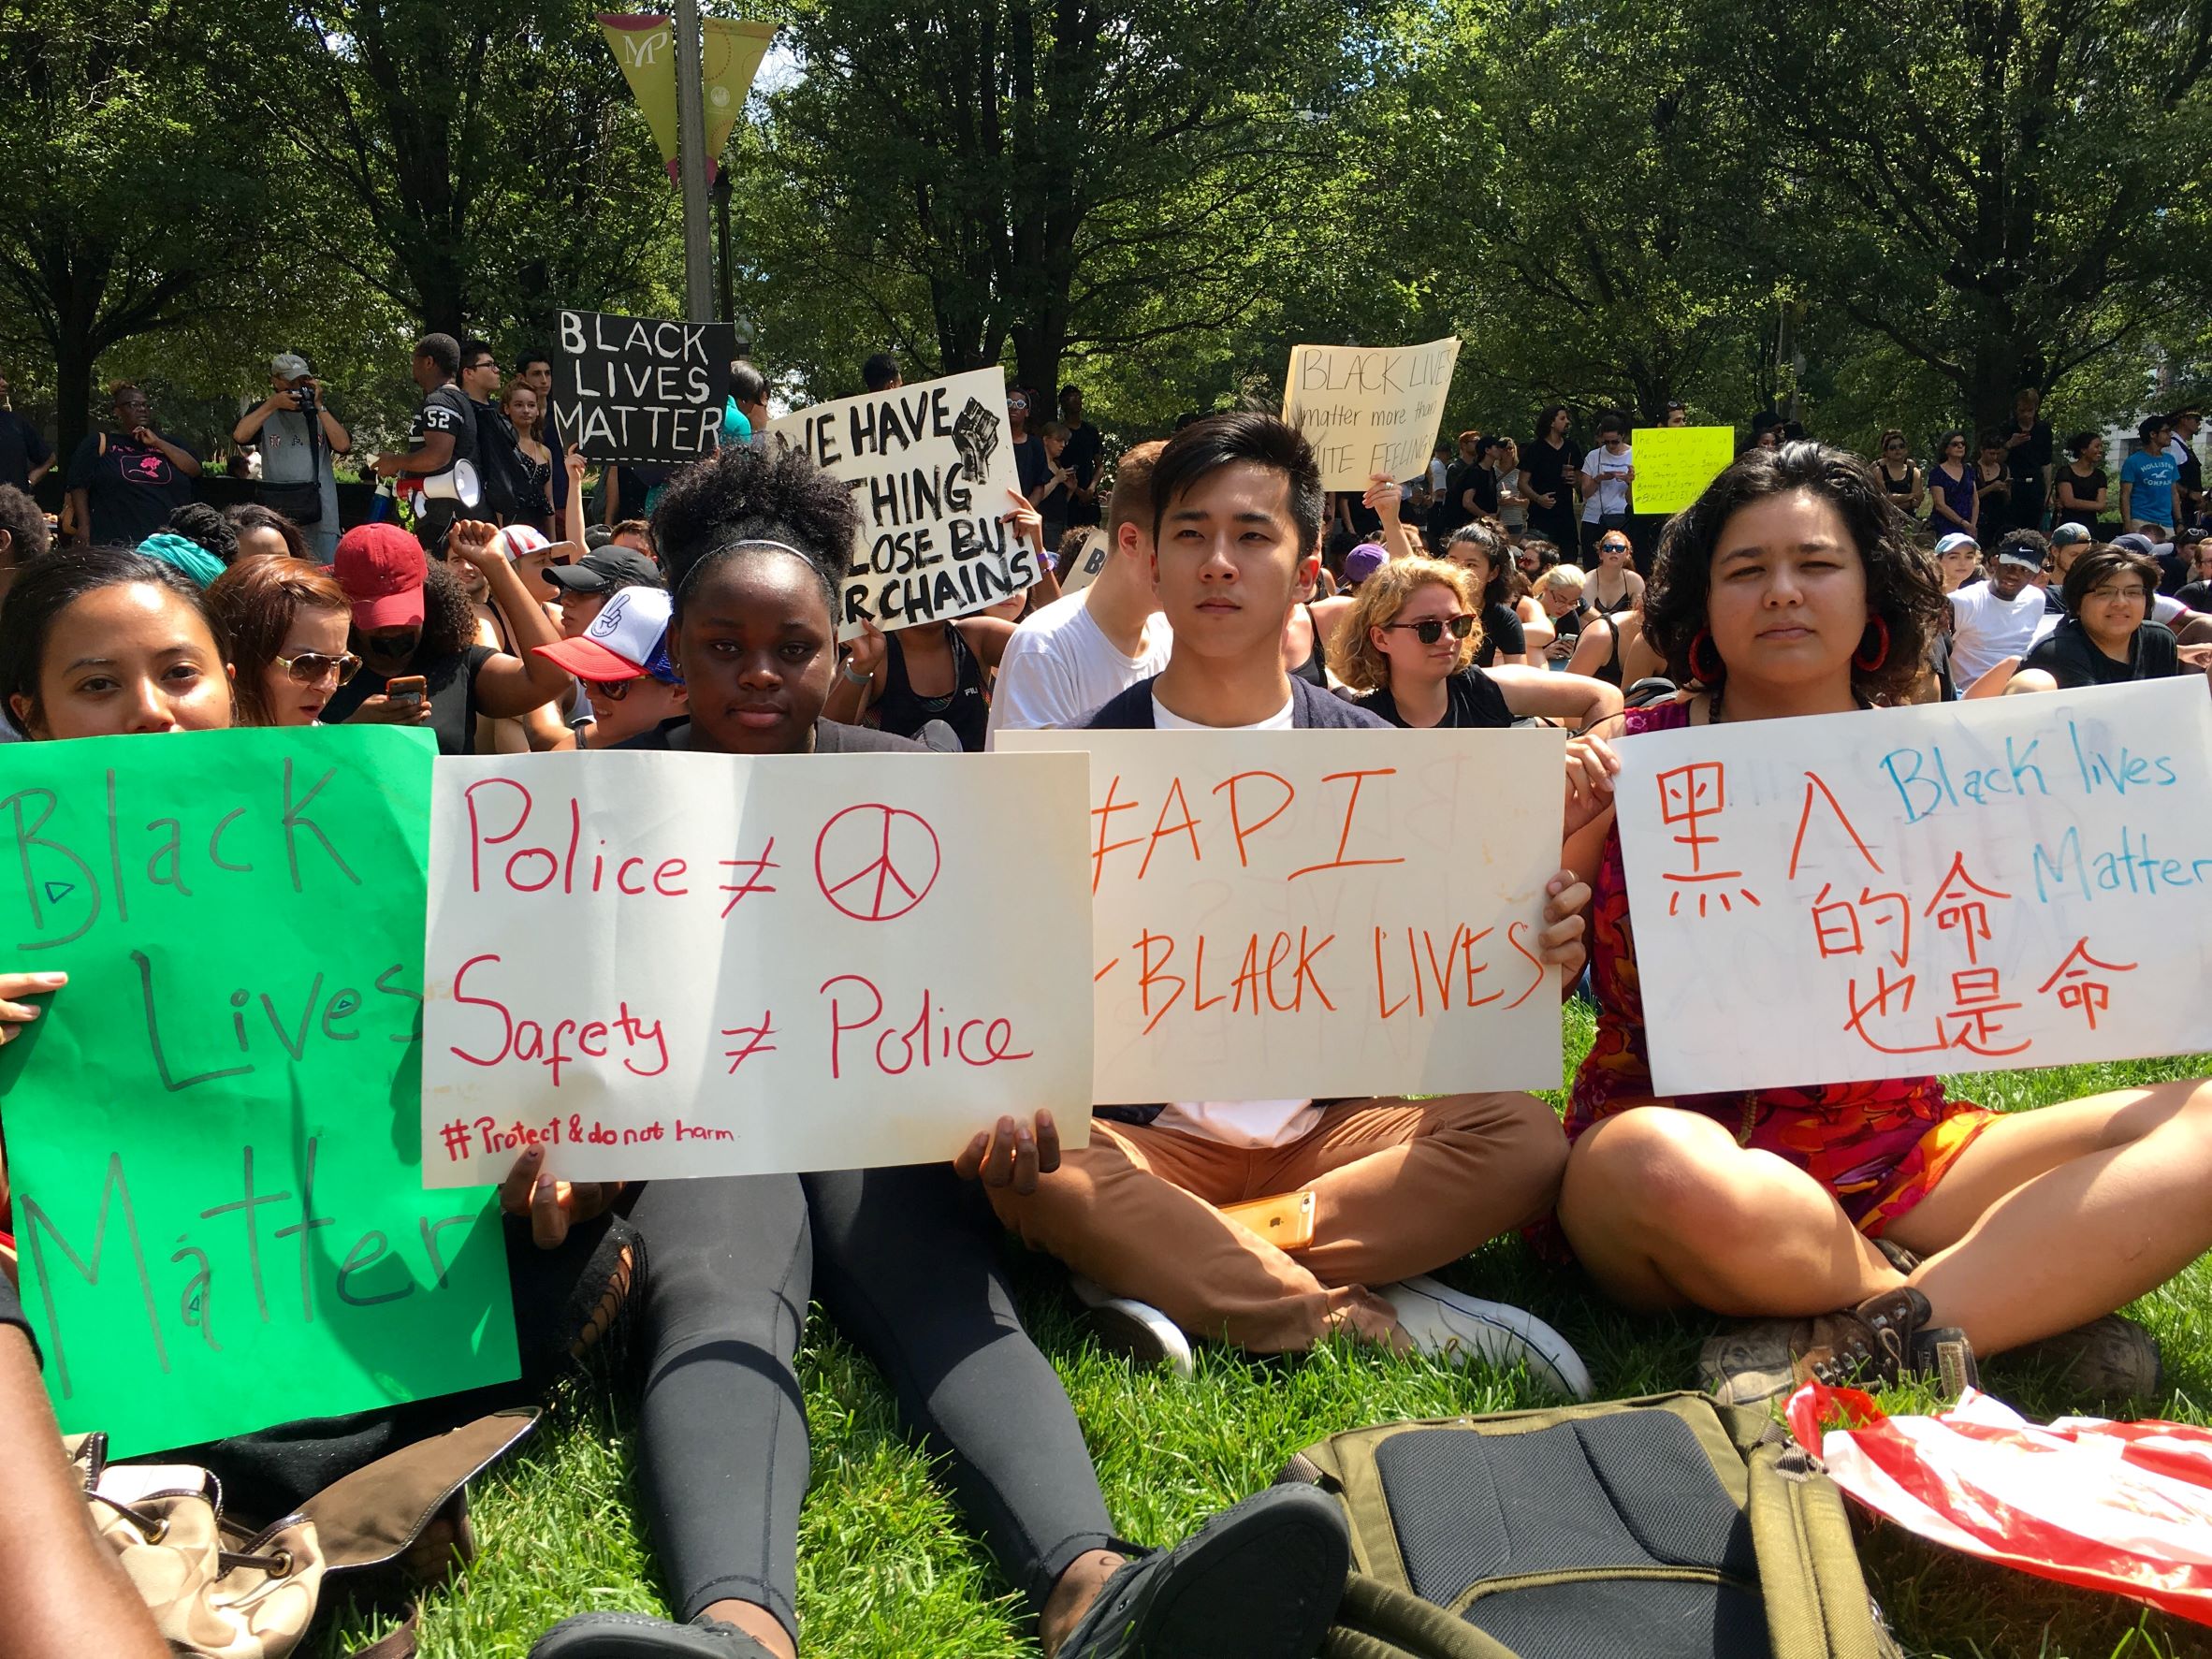 2016 SOL/PEP student Lance Tran sits with a crowd at a Black Lives Matter protest, holding up signs with Black Lives Matter slogans including #API4BlackLives.